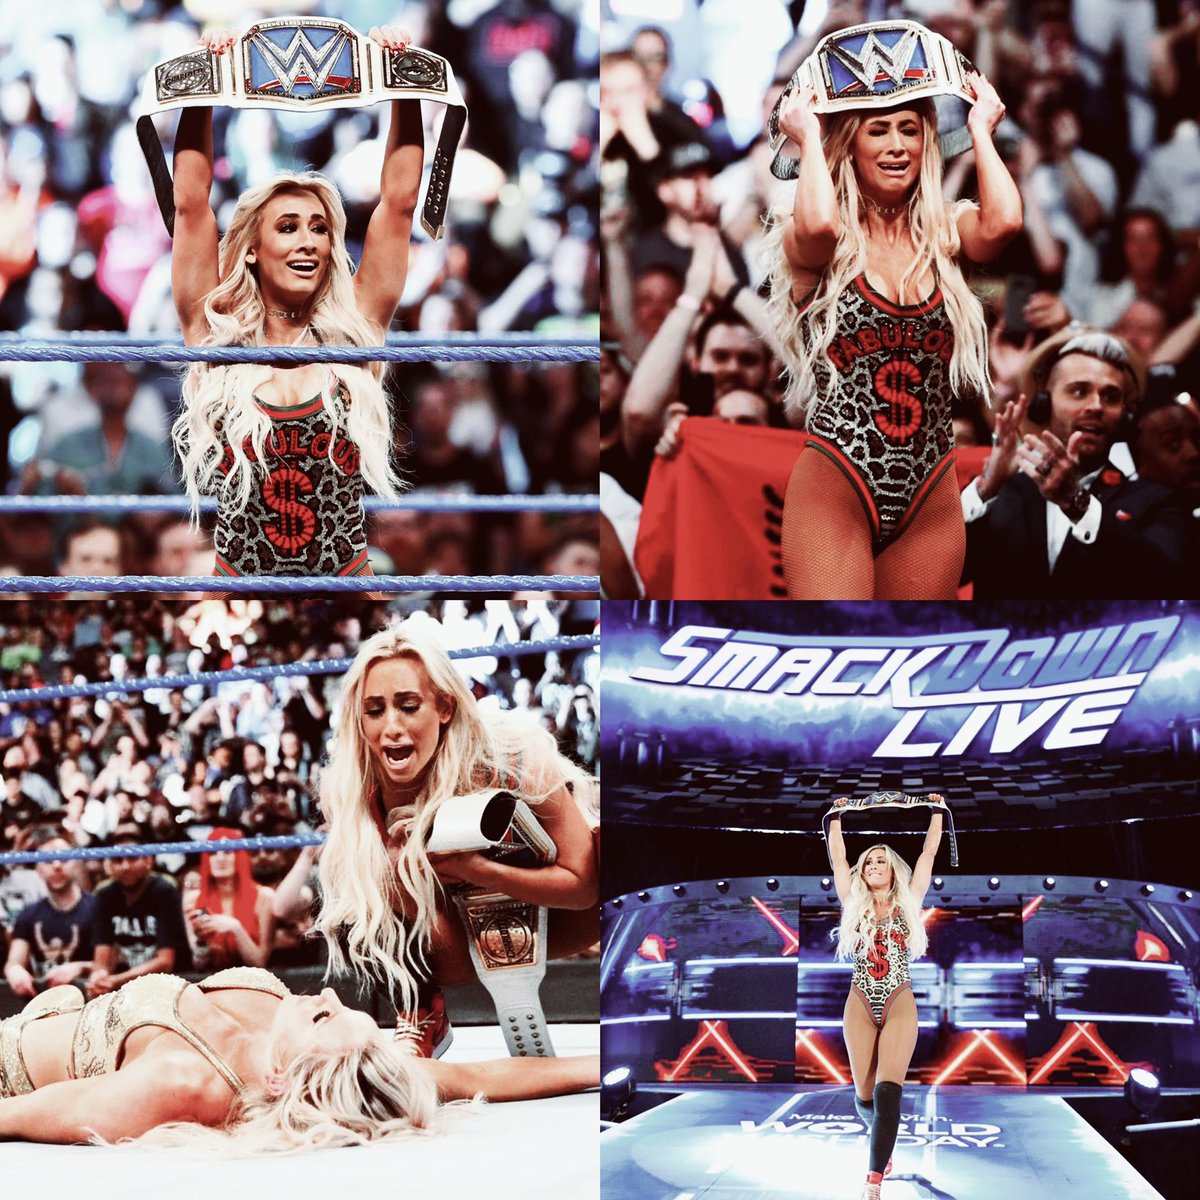 A first ballot Hall of Famer. The success @CarmellaWWE has had in her career ever since being the last draft pick will always make my heart burst. You deserve this all and so much more. Happy 6 year anniversary to this history making moment. 🤍